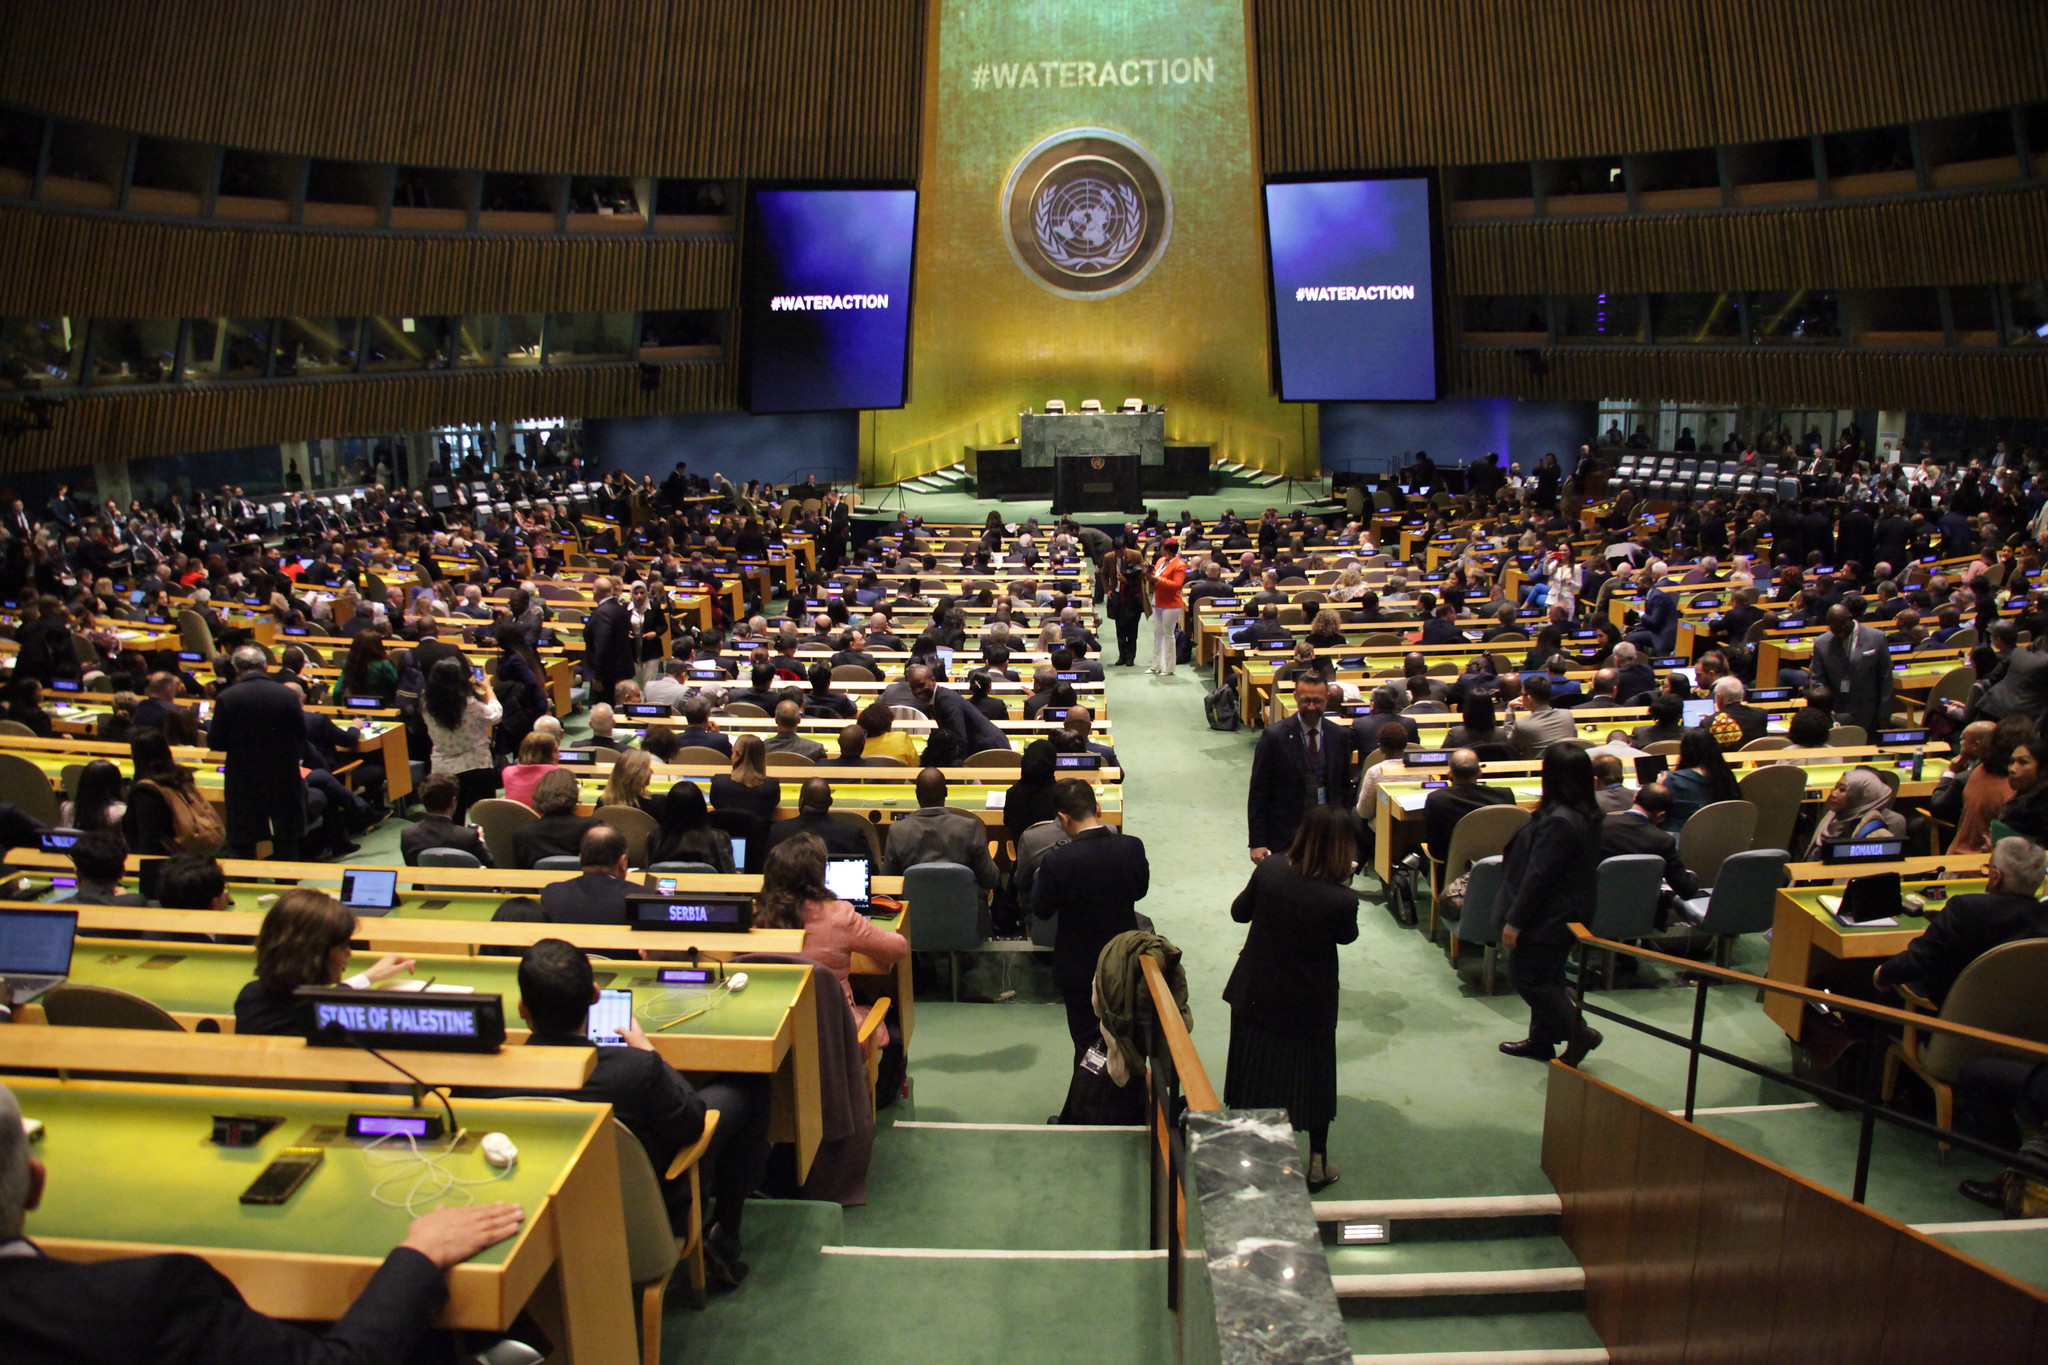 2023 UN water conference assembly hall